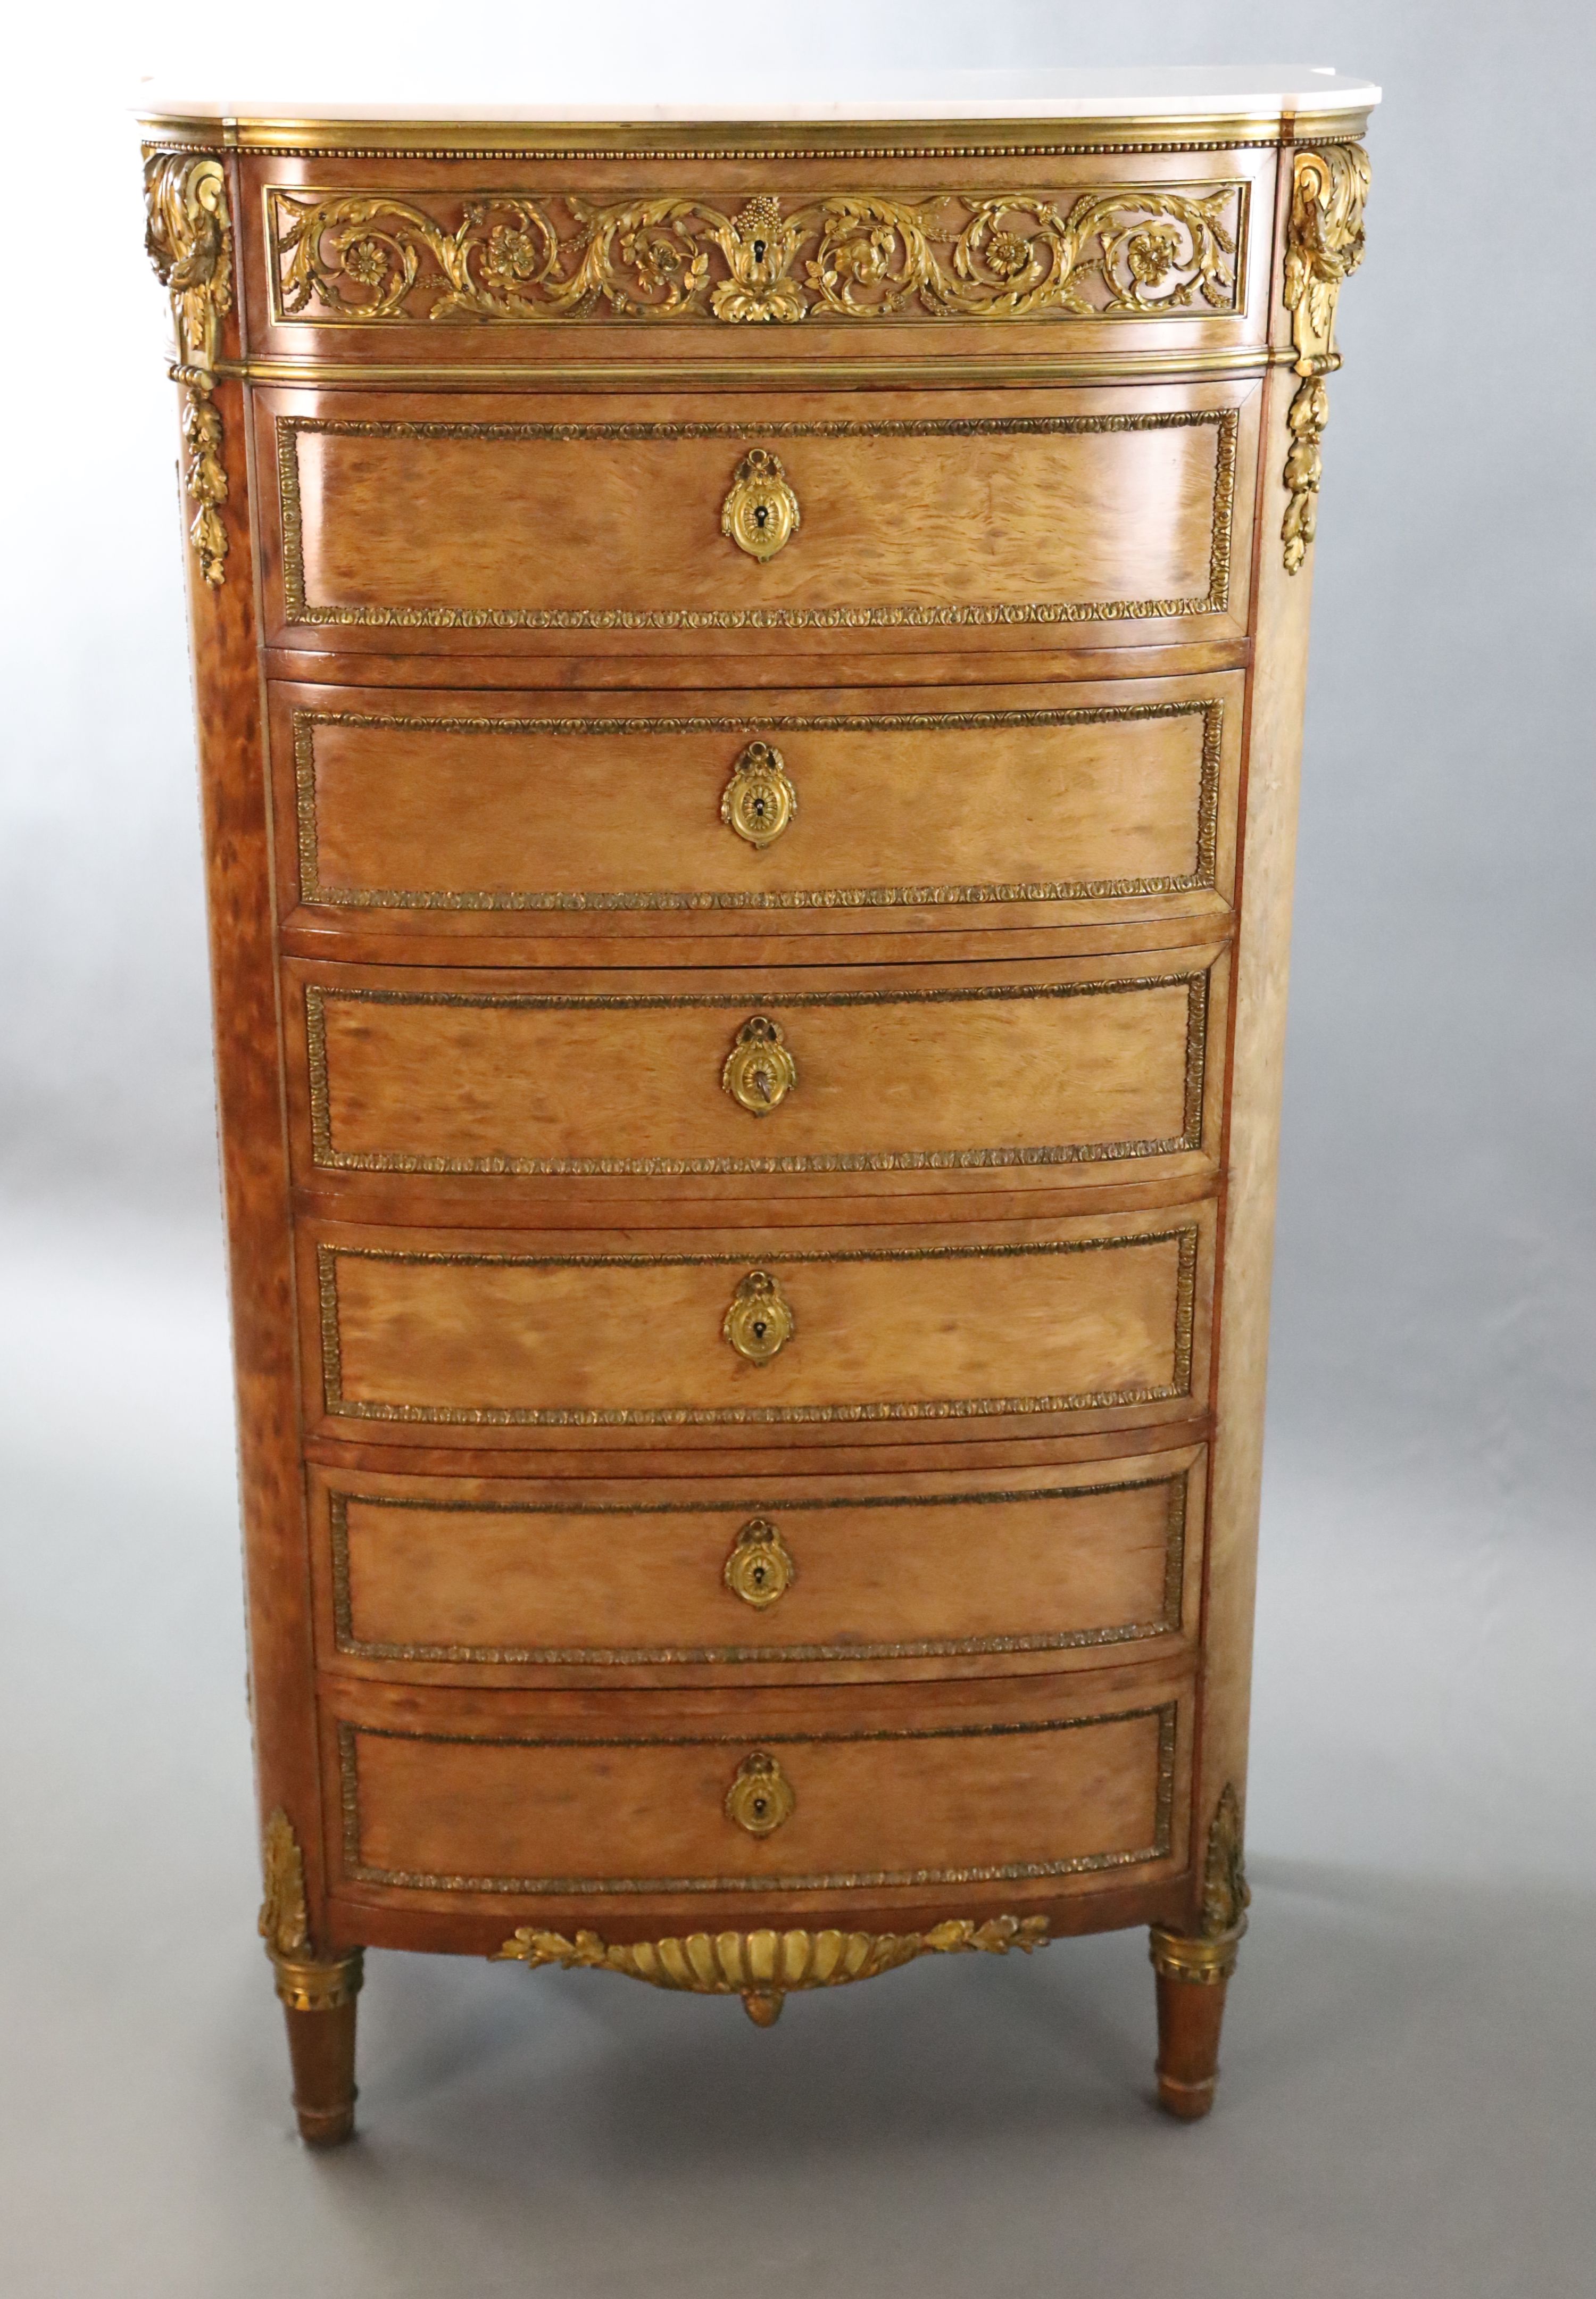 A Louis XVI style ormolu mounted mahogany semanier, W.2ft 7.5in. D.1ft 6.5in. H.4ft 7.5in.